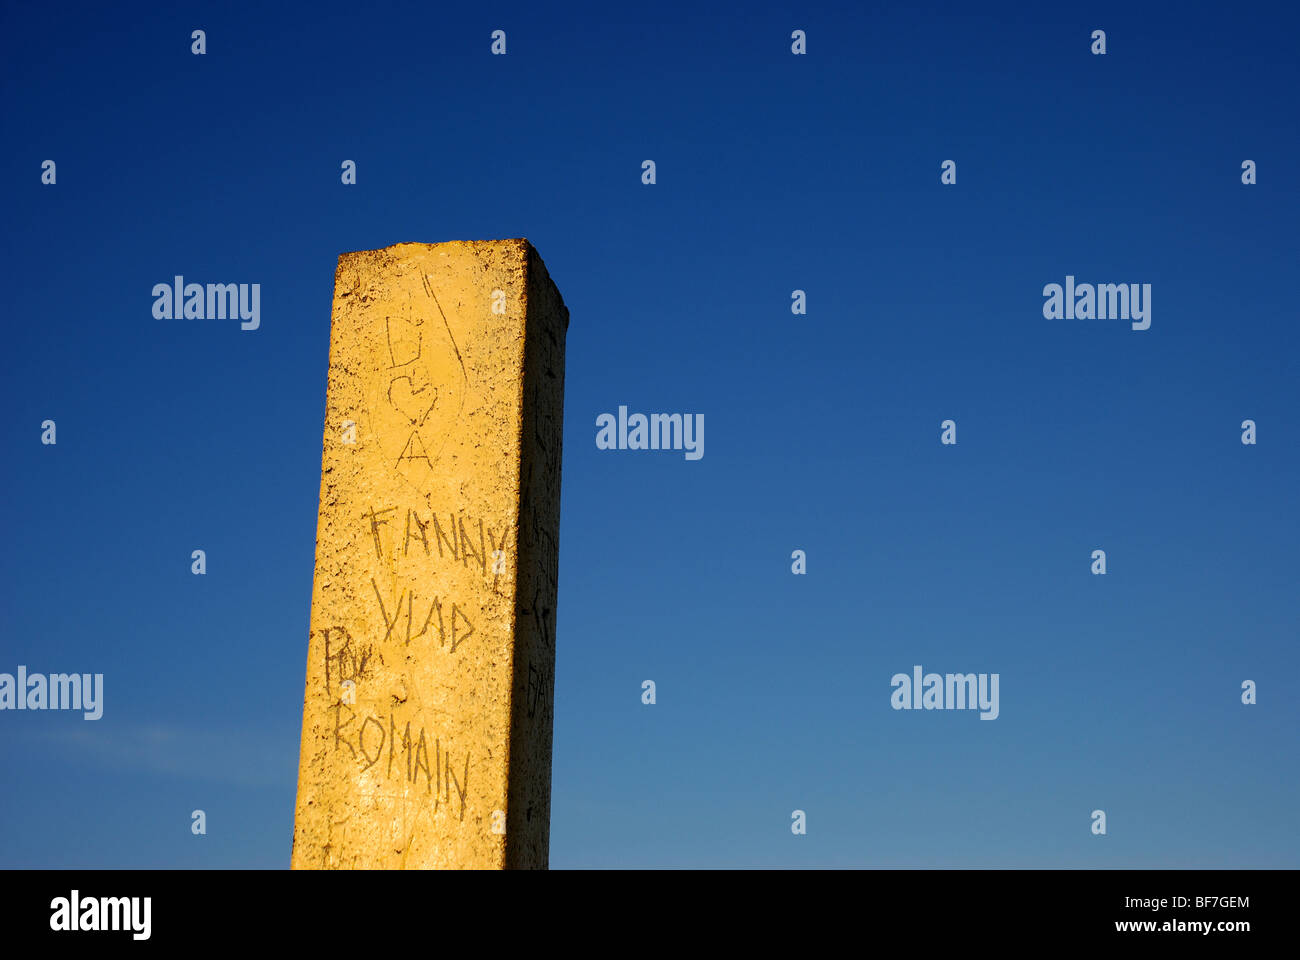 Yellow pole with graffiti against blue sky Stock Photo